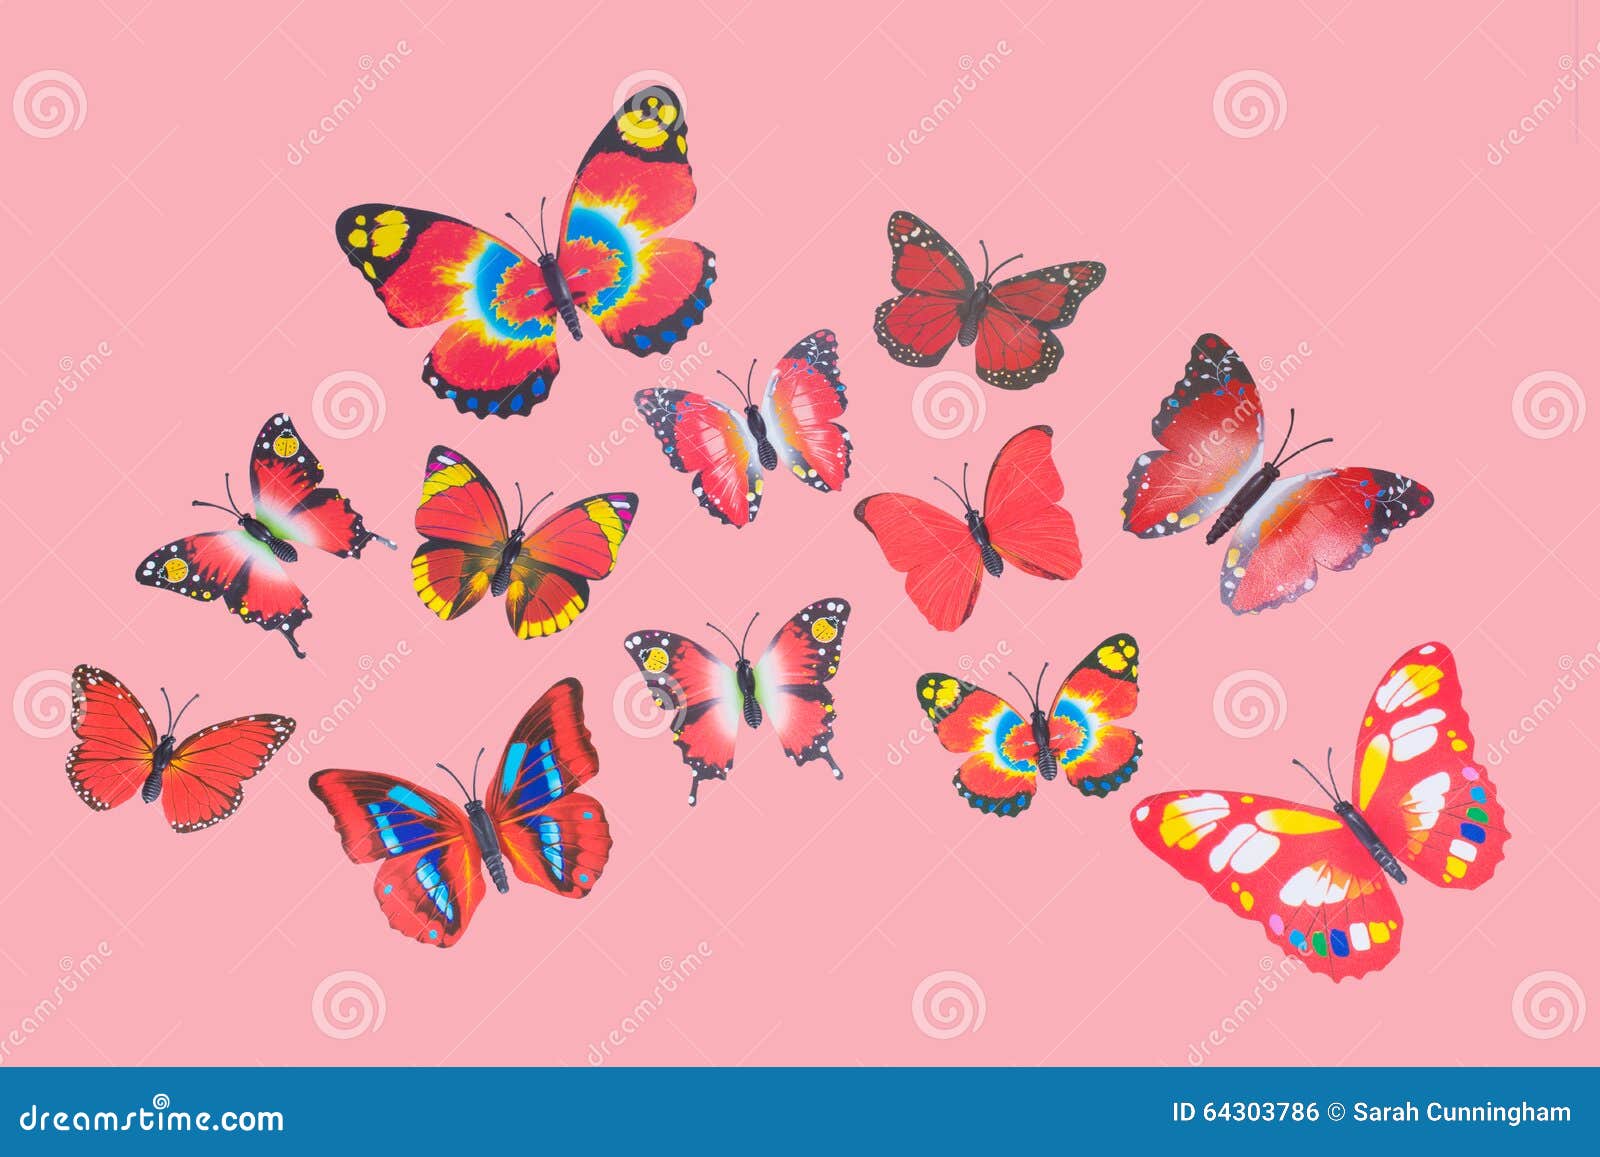 Red Fantasy Butterflies stock photo. Image of collection - 64303786